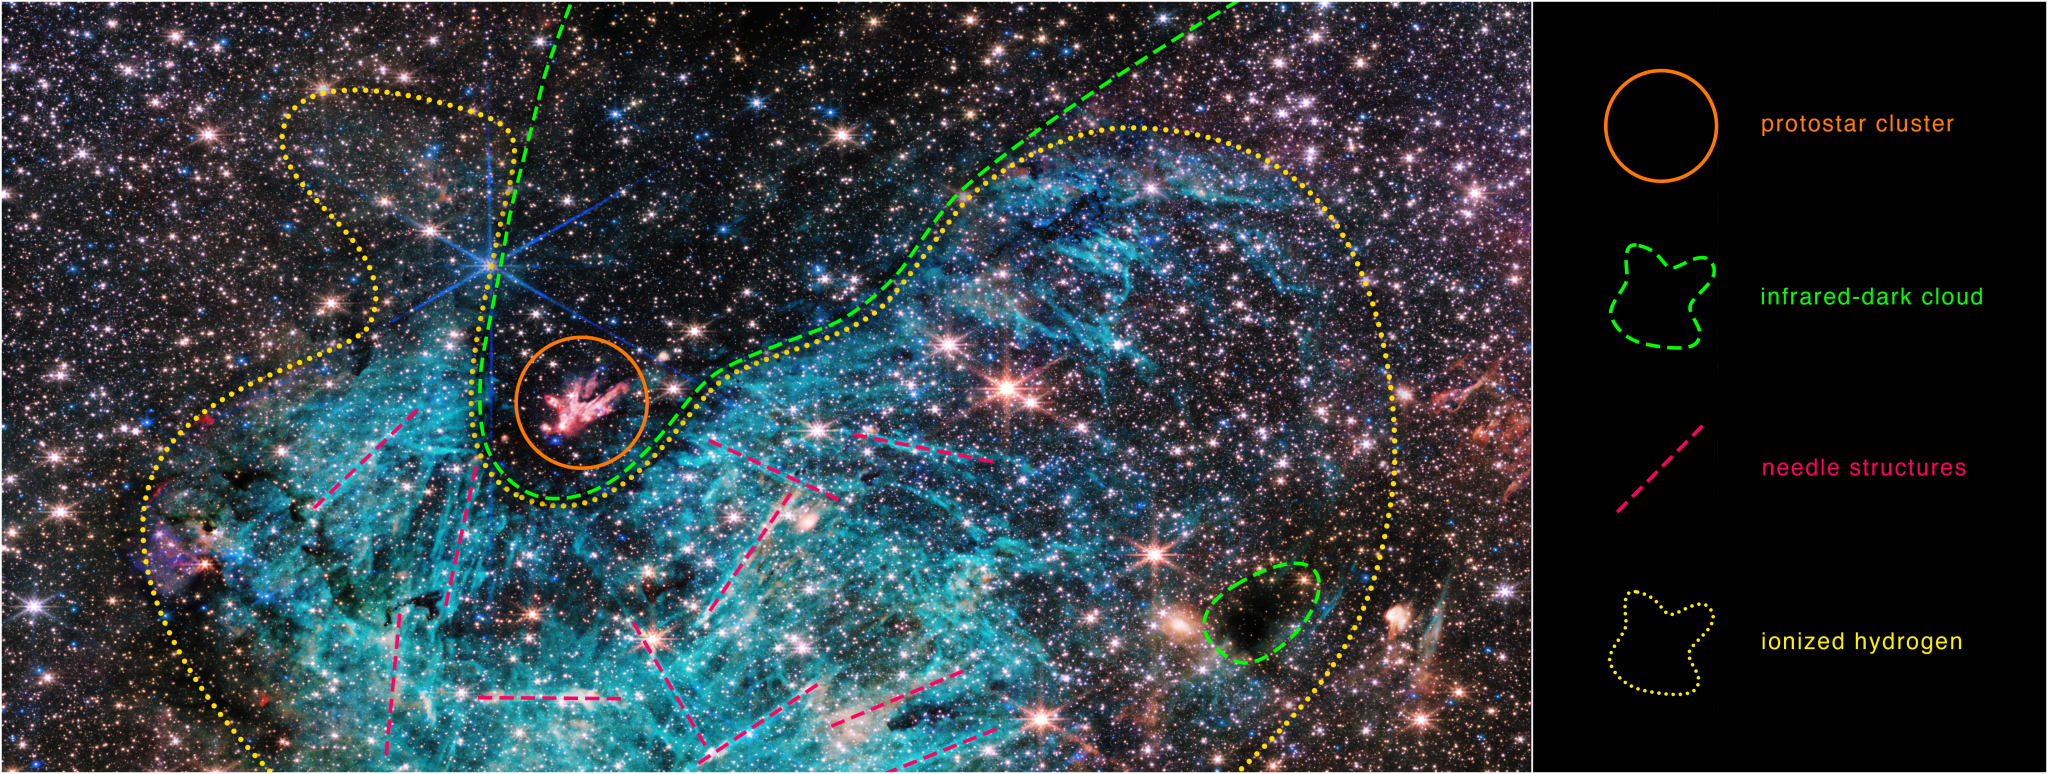 A crowded region of space, full of stars and colorful clouds, more than twice as wide as it is tall, with features outlined in the image in different colors. A key on the right indicates what each outline is highlighting. From the top of the key down: an orange circle next to text, protostar cluster. An irregular green dashed-line shape with text, infrared-dark cloud. A straight red dashed-line with text, needle structures. An irregular yellow dotted-line shape with text, ionized hydrogen. See extended description for more details on the image.